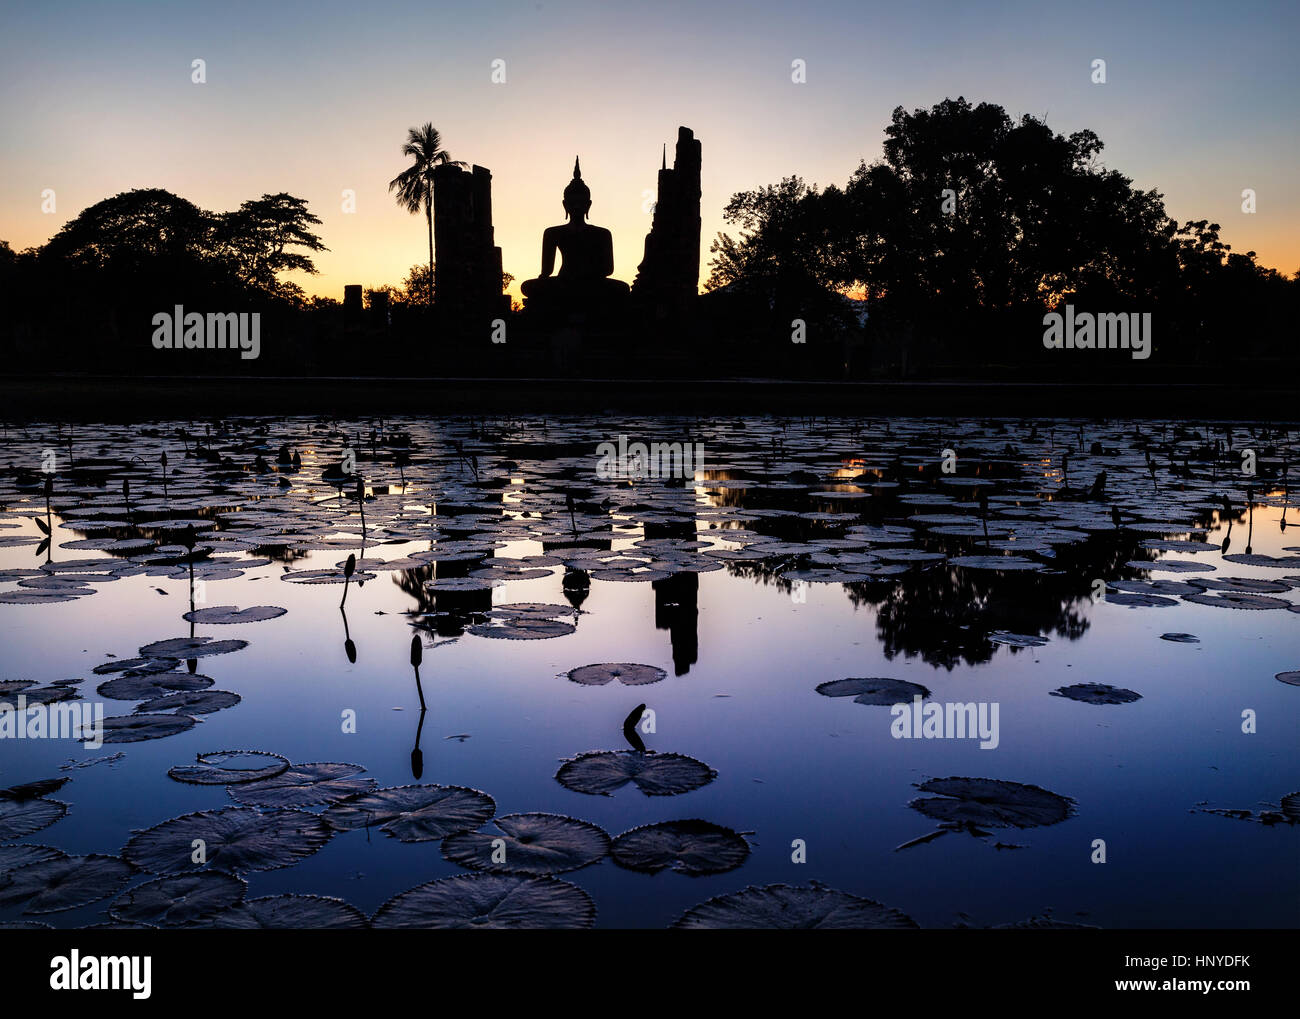 Beautiful scenery of Wat Mahathat Temple in Sukhothai Historical Park with Buddha statue silhouette and reflections on the pond in Thailand Stock Photo